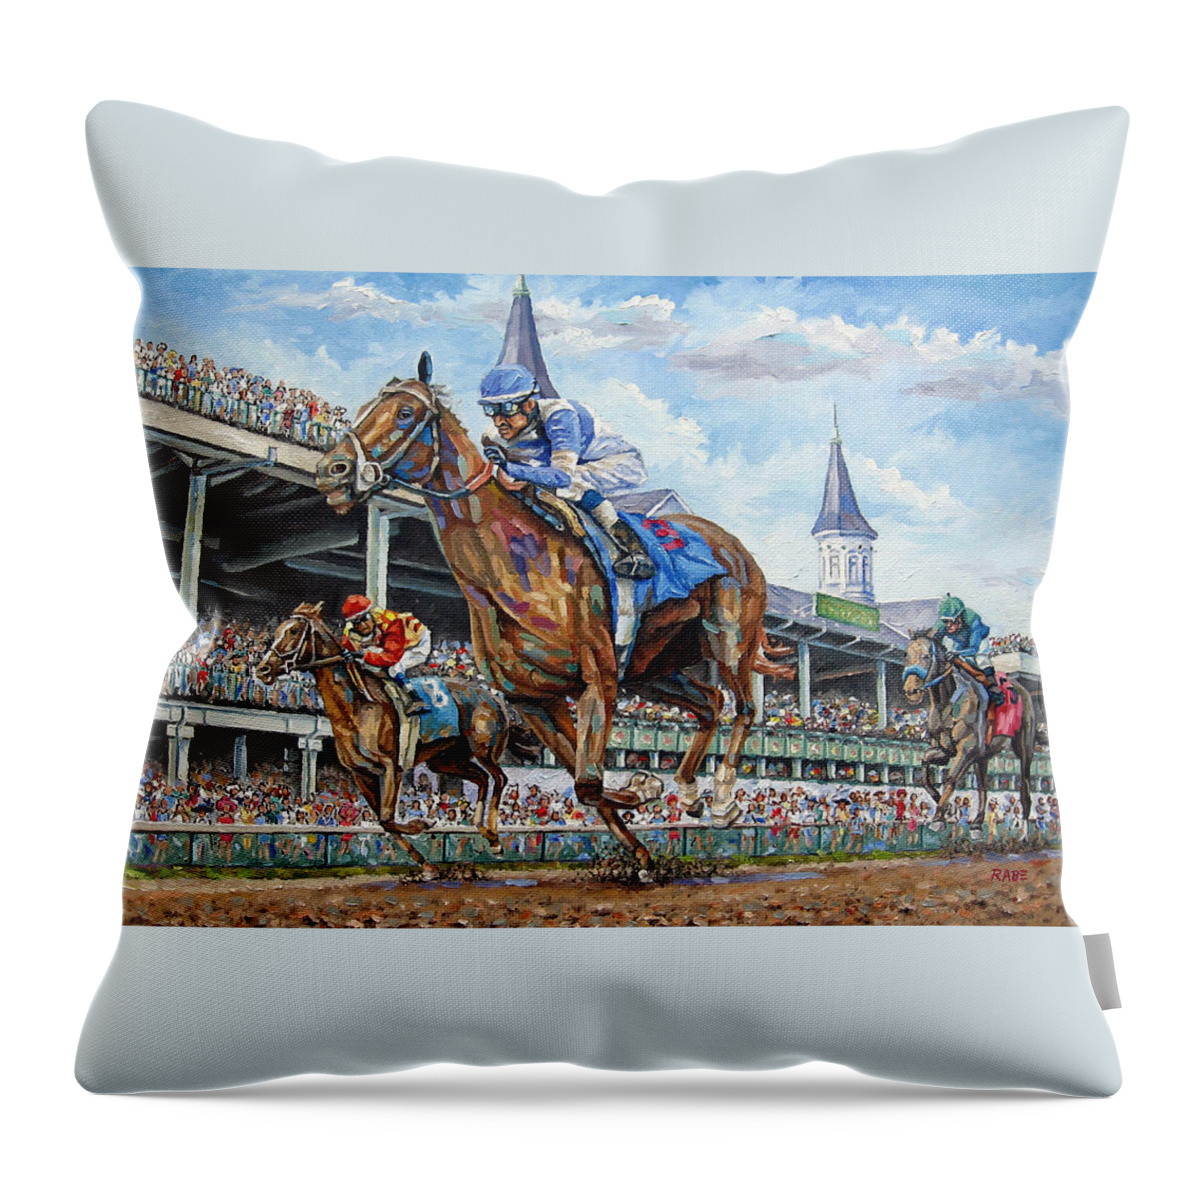 Kentucky Derby Throw Pillow featuring the painting Kentucky Derby - Horse Racing Art by Mike Rabe